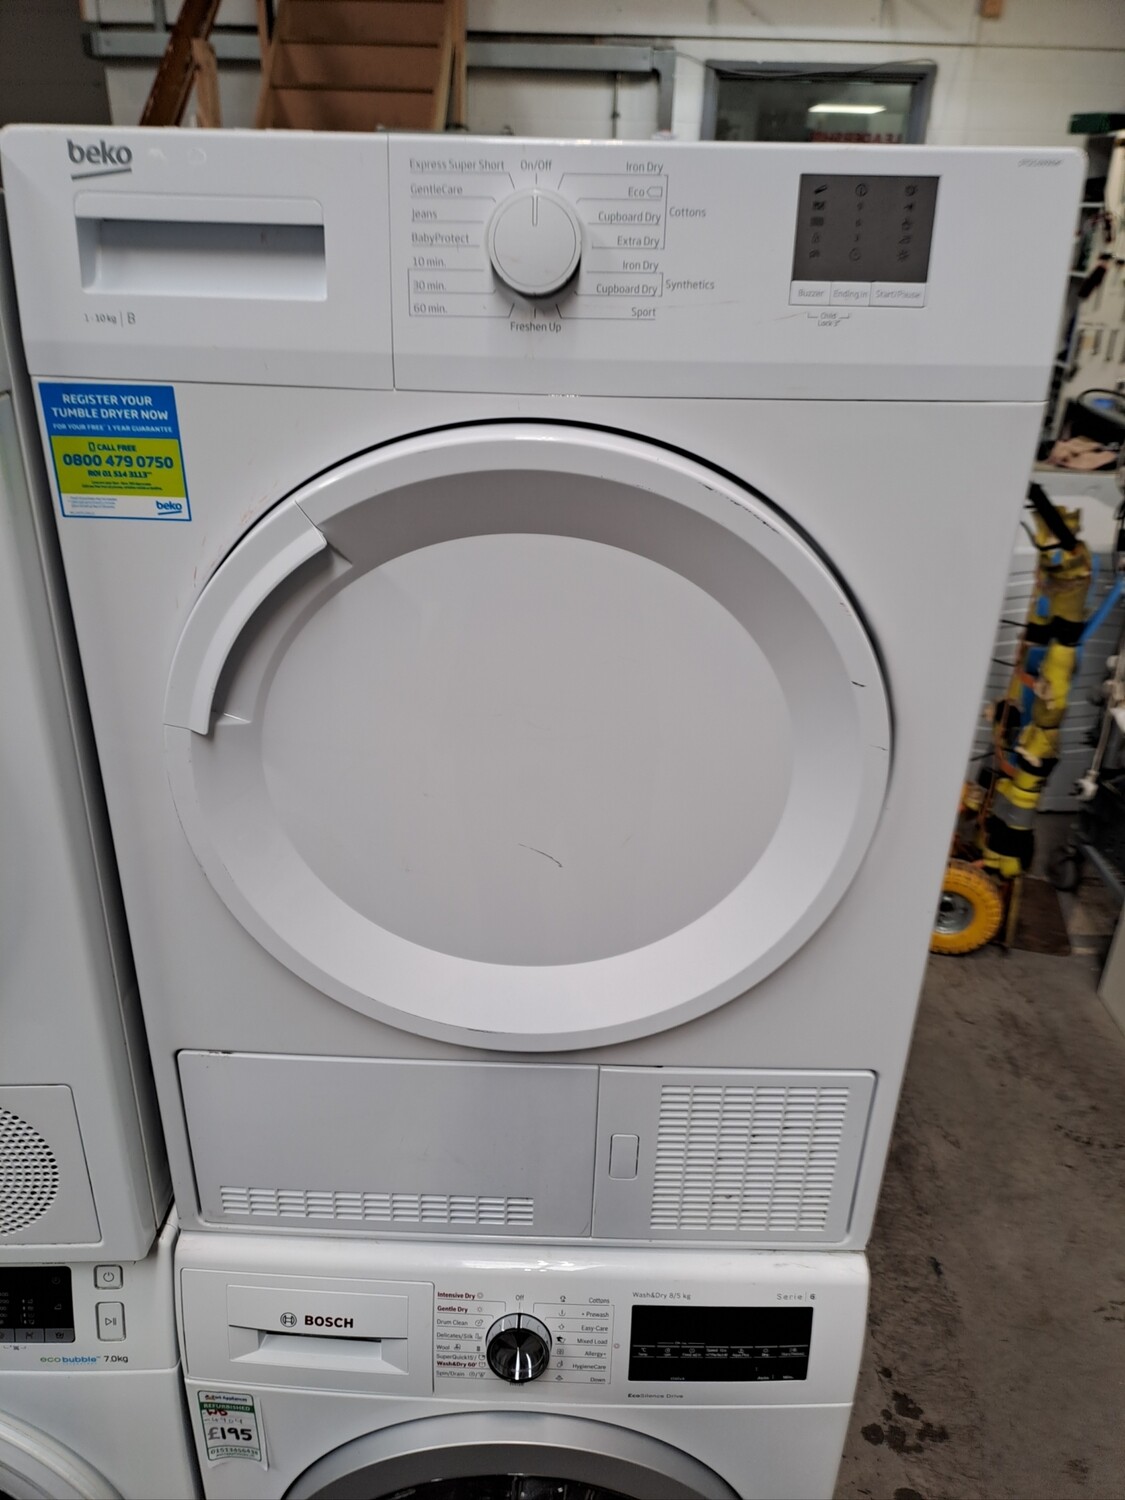 Beko DTGC10000W 10kg Condenser Dryer White Refurbished 6 Months Guarantee. This item is located in our Whitby Road Shop 